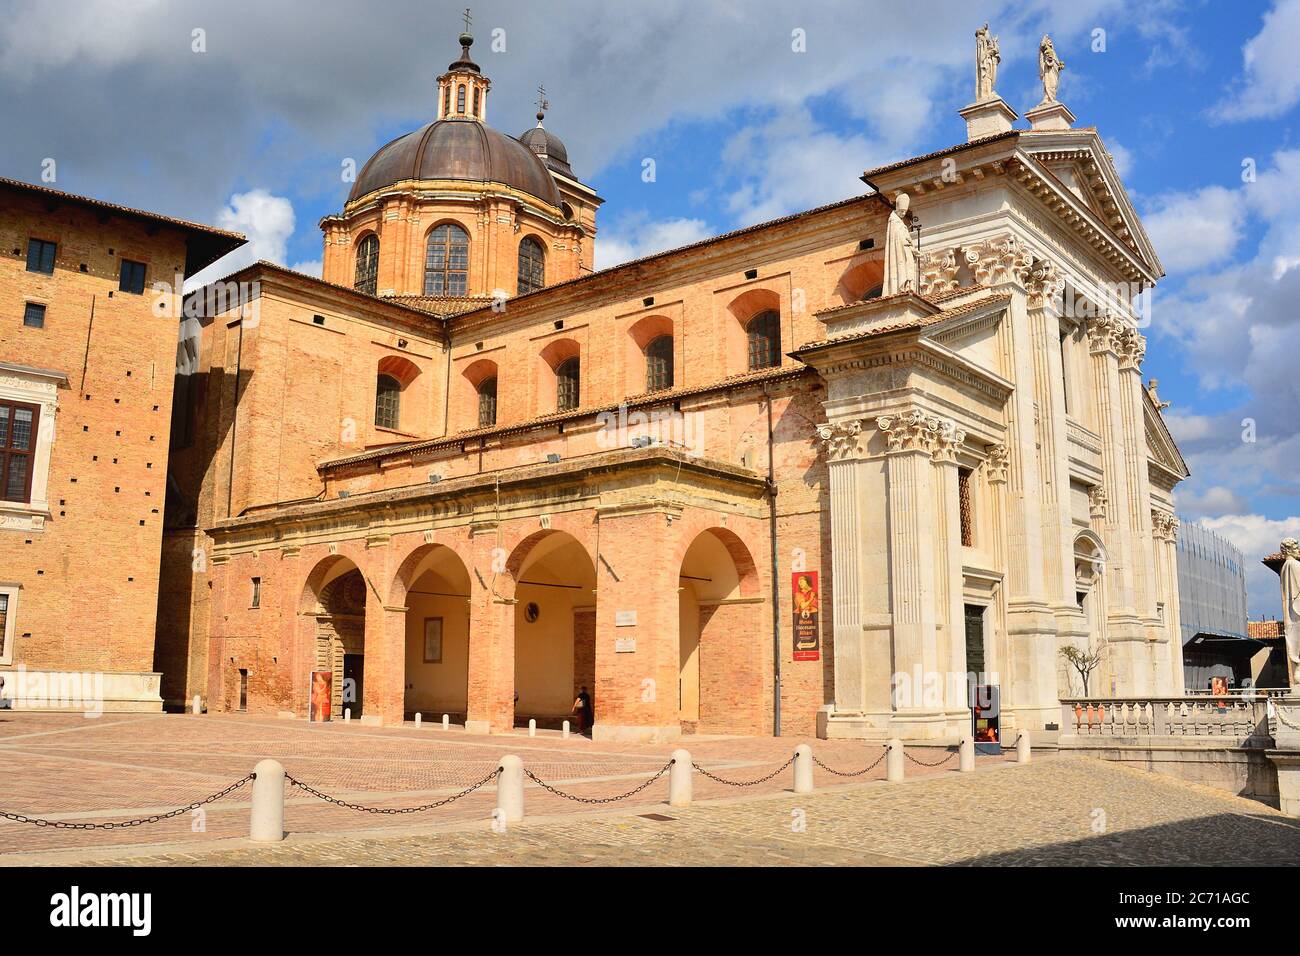 Urbino,Marche,Italia.The Cattedrale Metropolitana di Santa Maria Assunta is located in the center of the city and contains remarkable works of art. Stock Photo